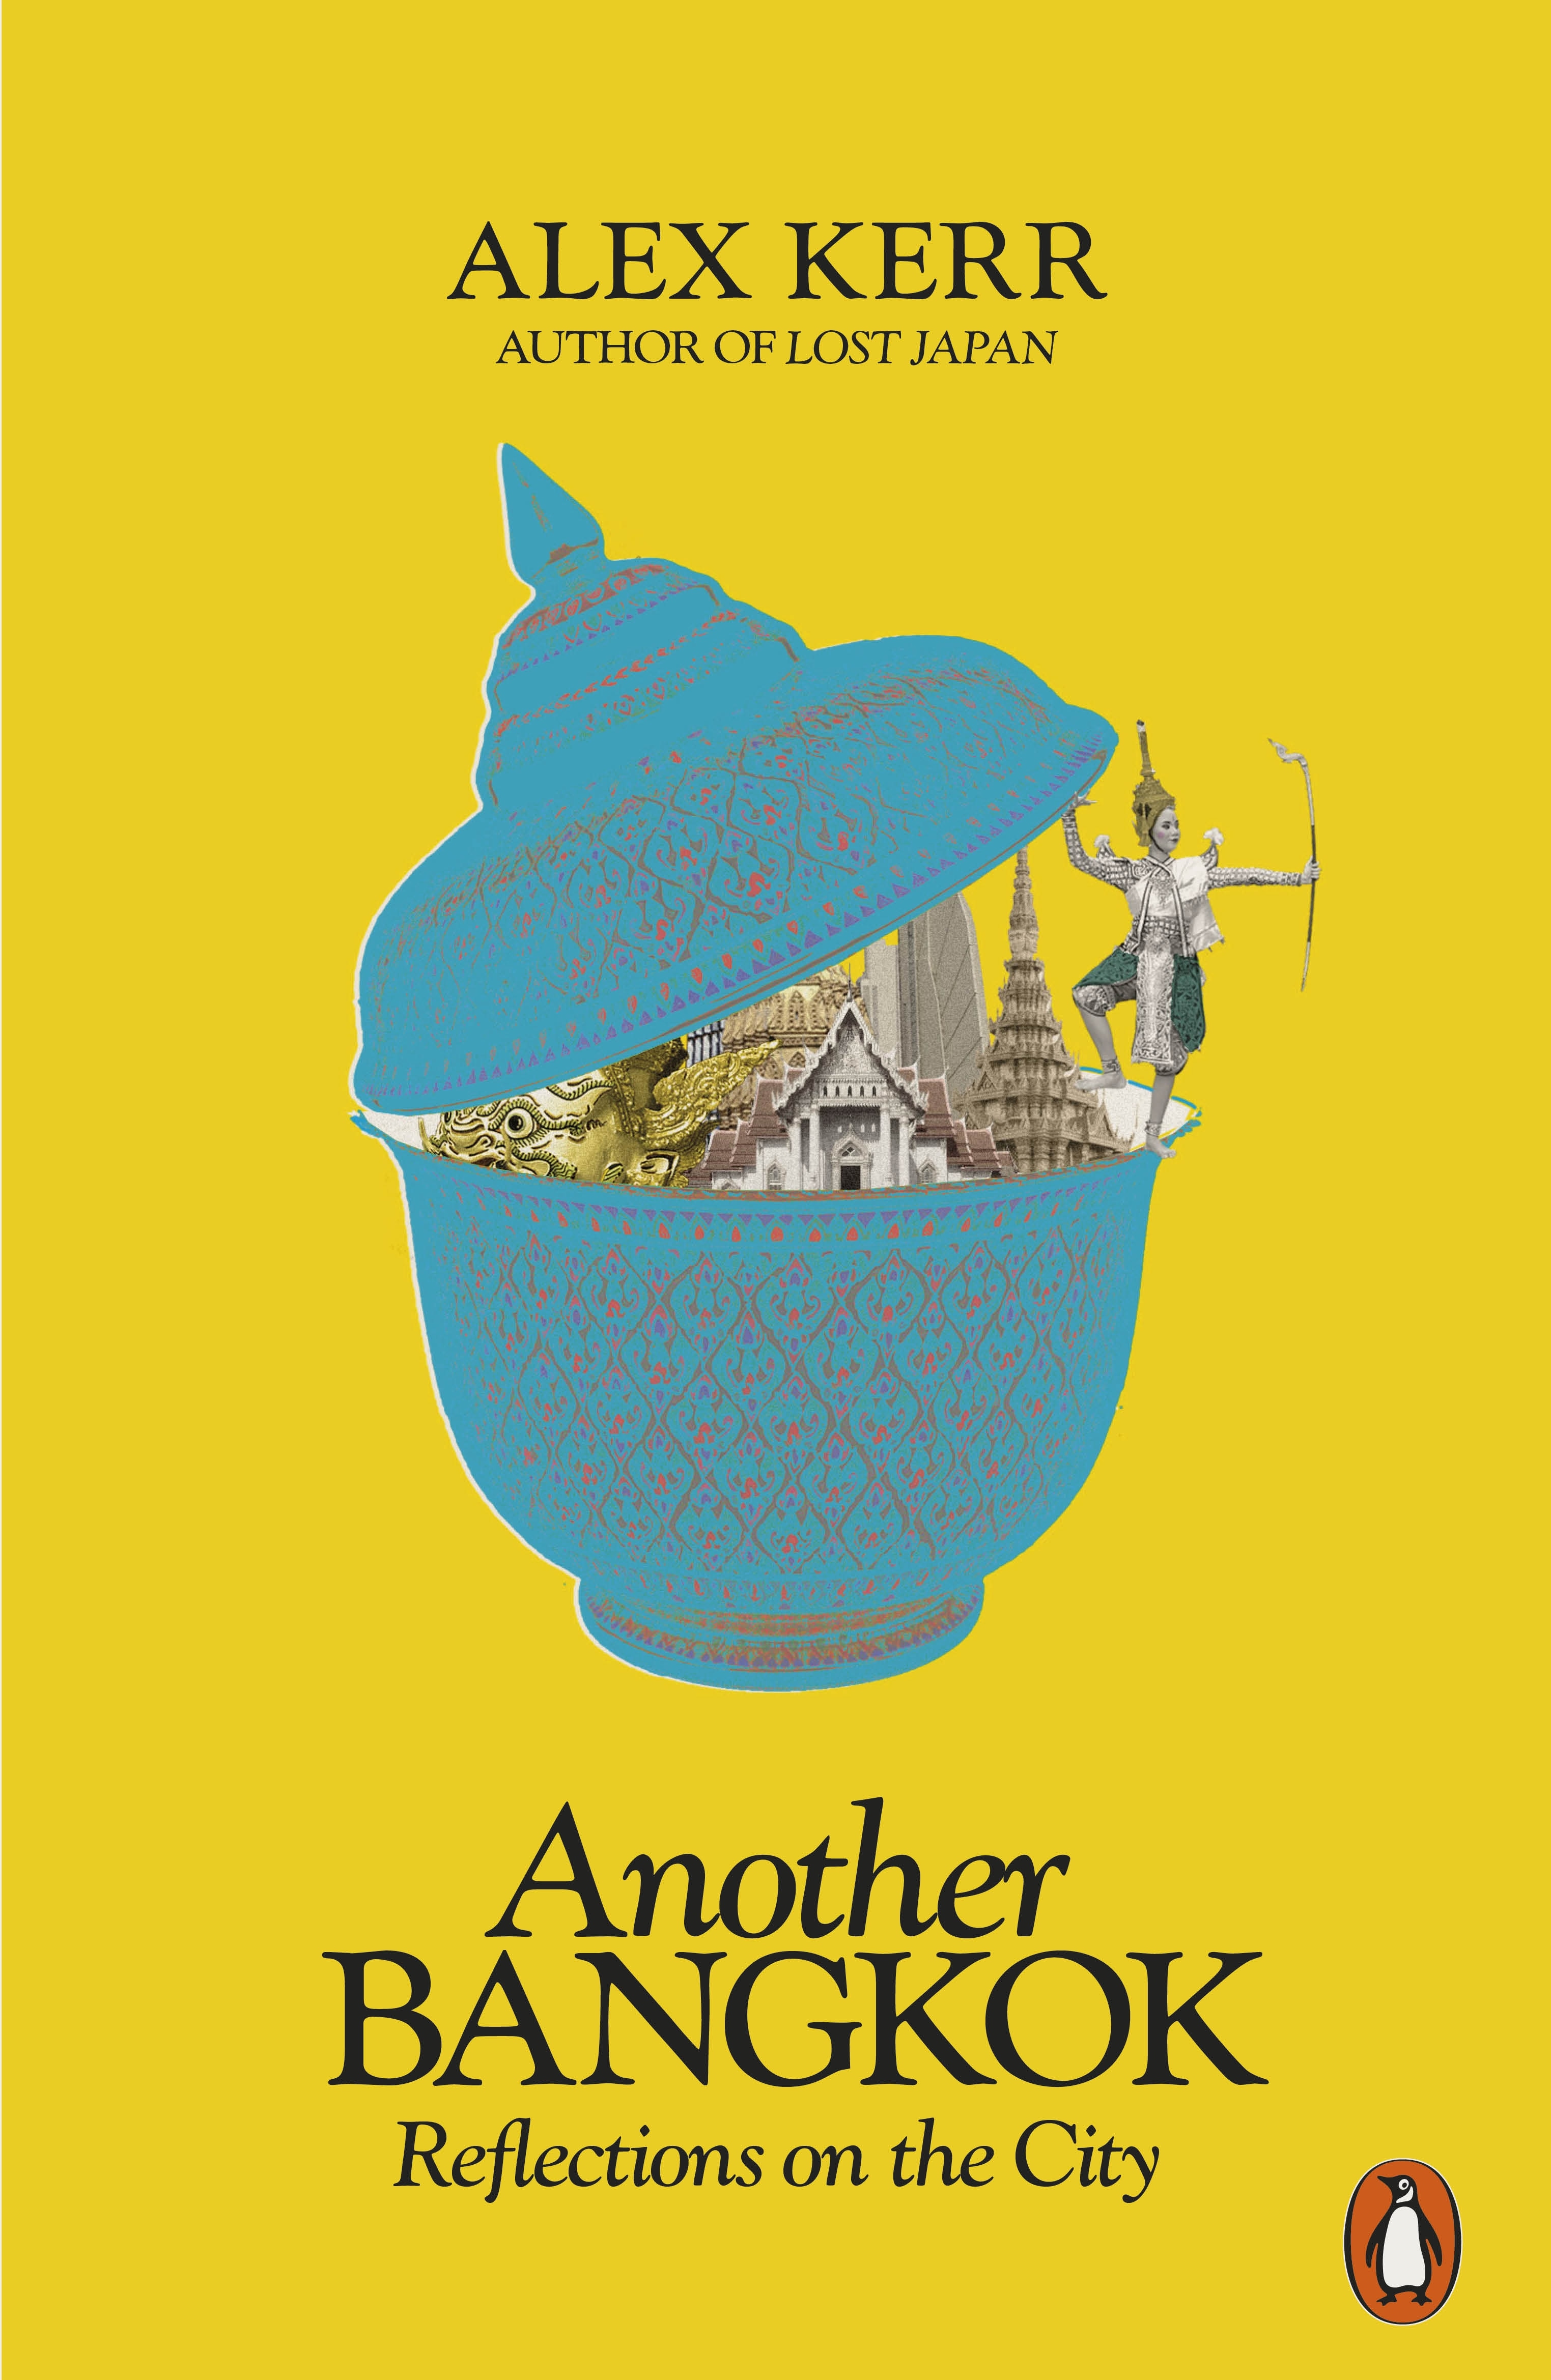 Book “Another Bangkok” by Alex Kerr — July 1, 2021